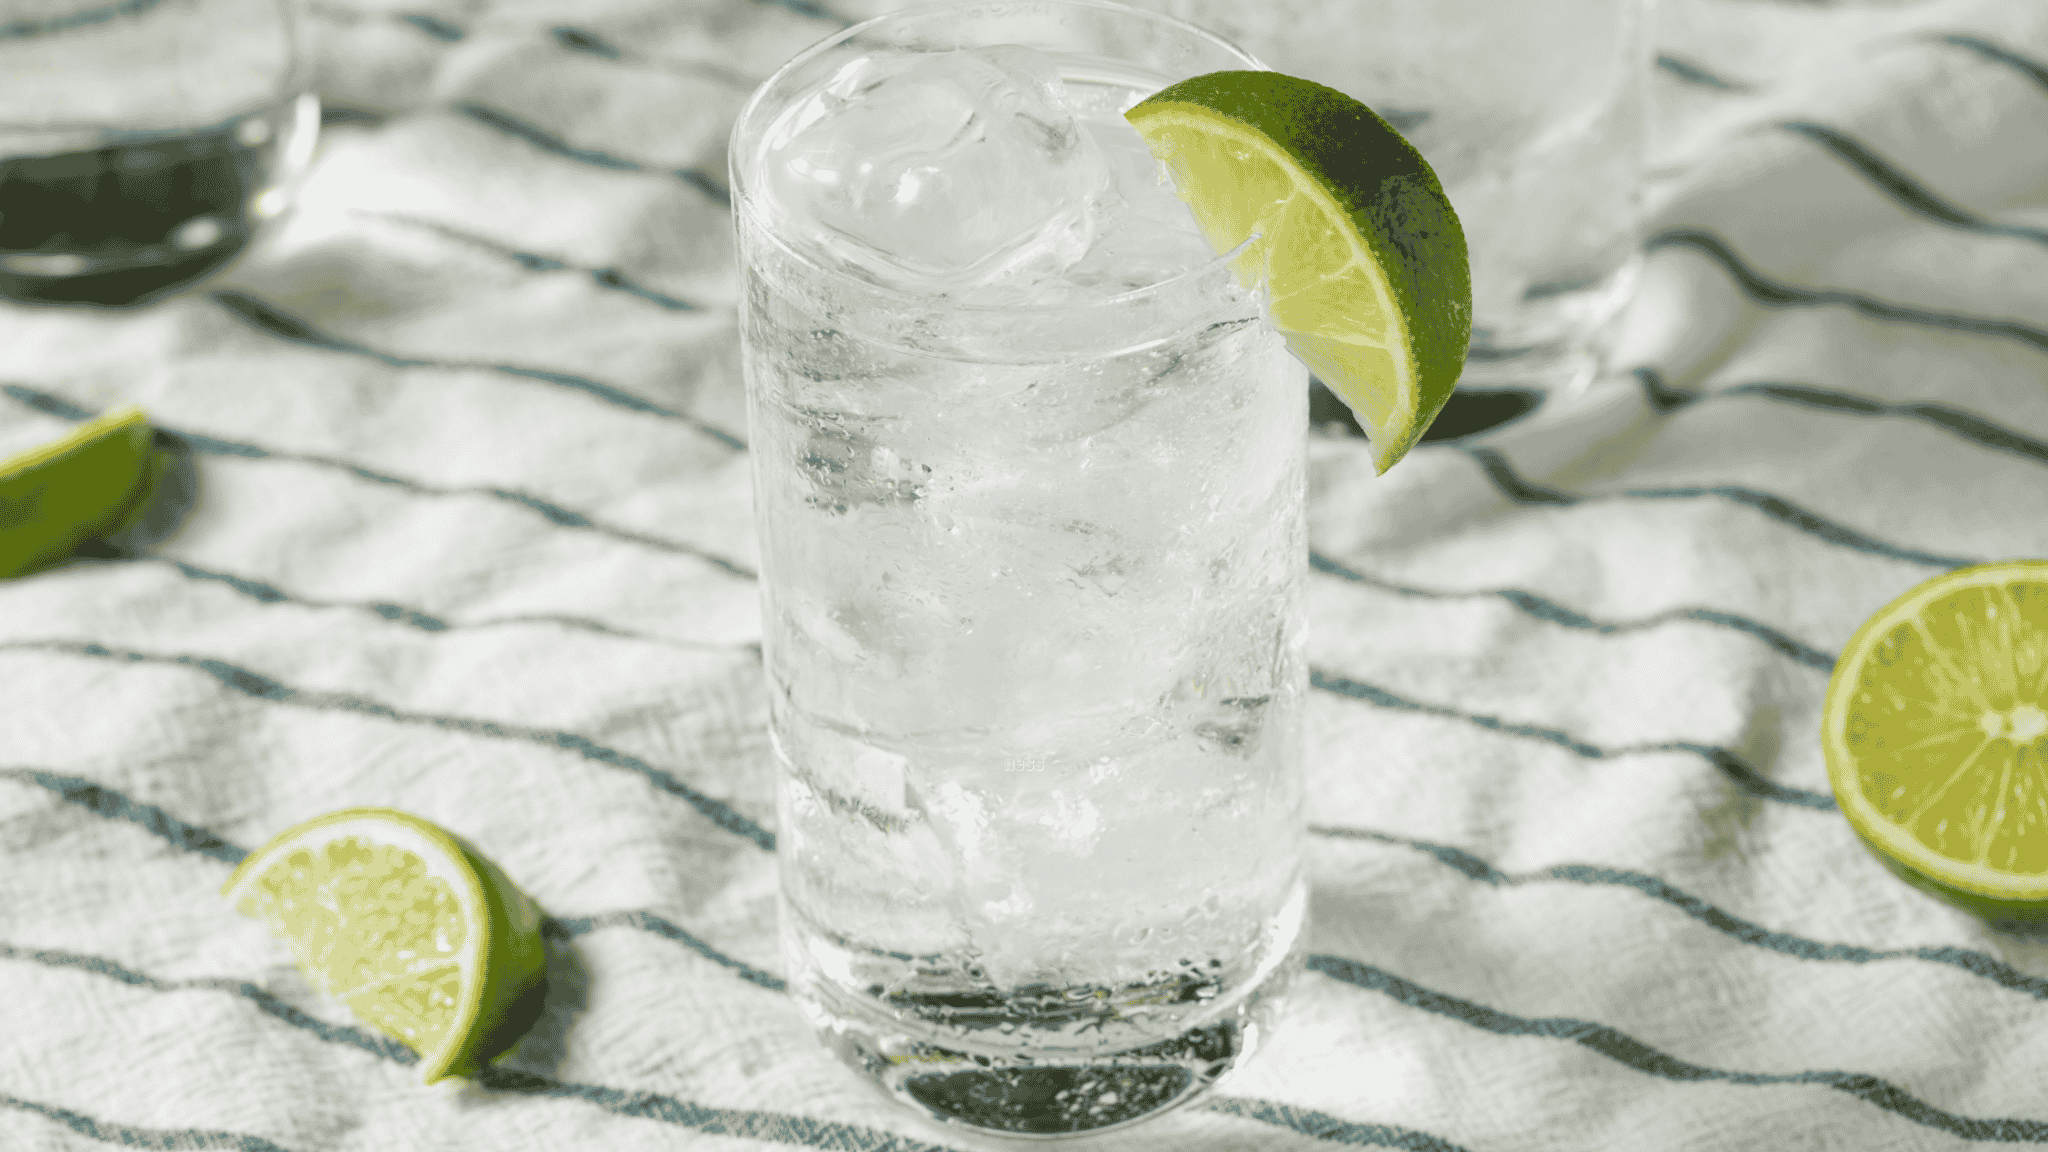 cup of tequila soda on white cloth with limes